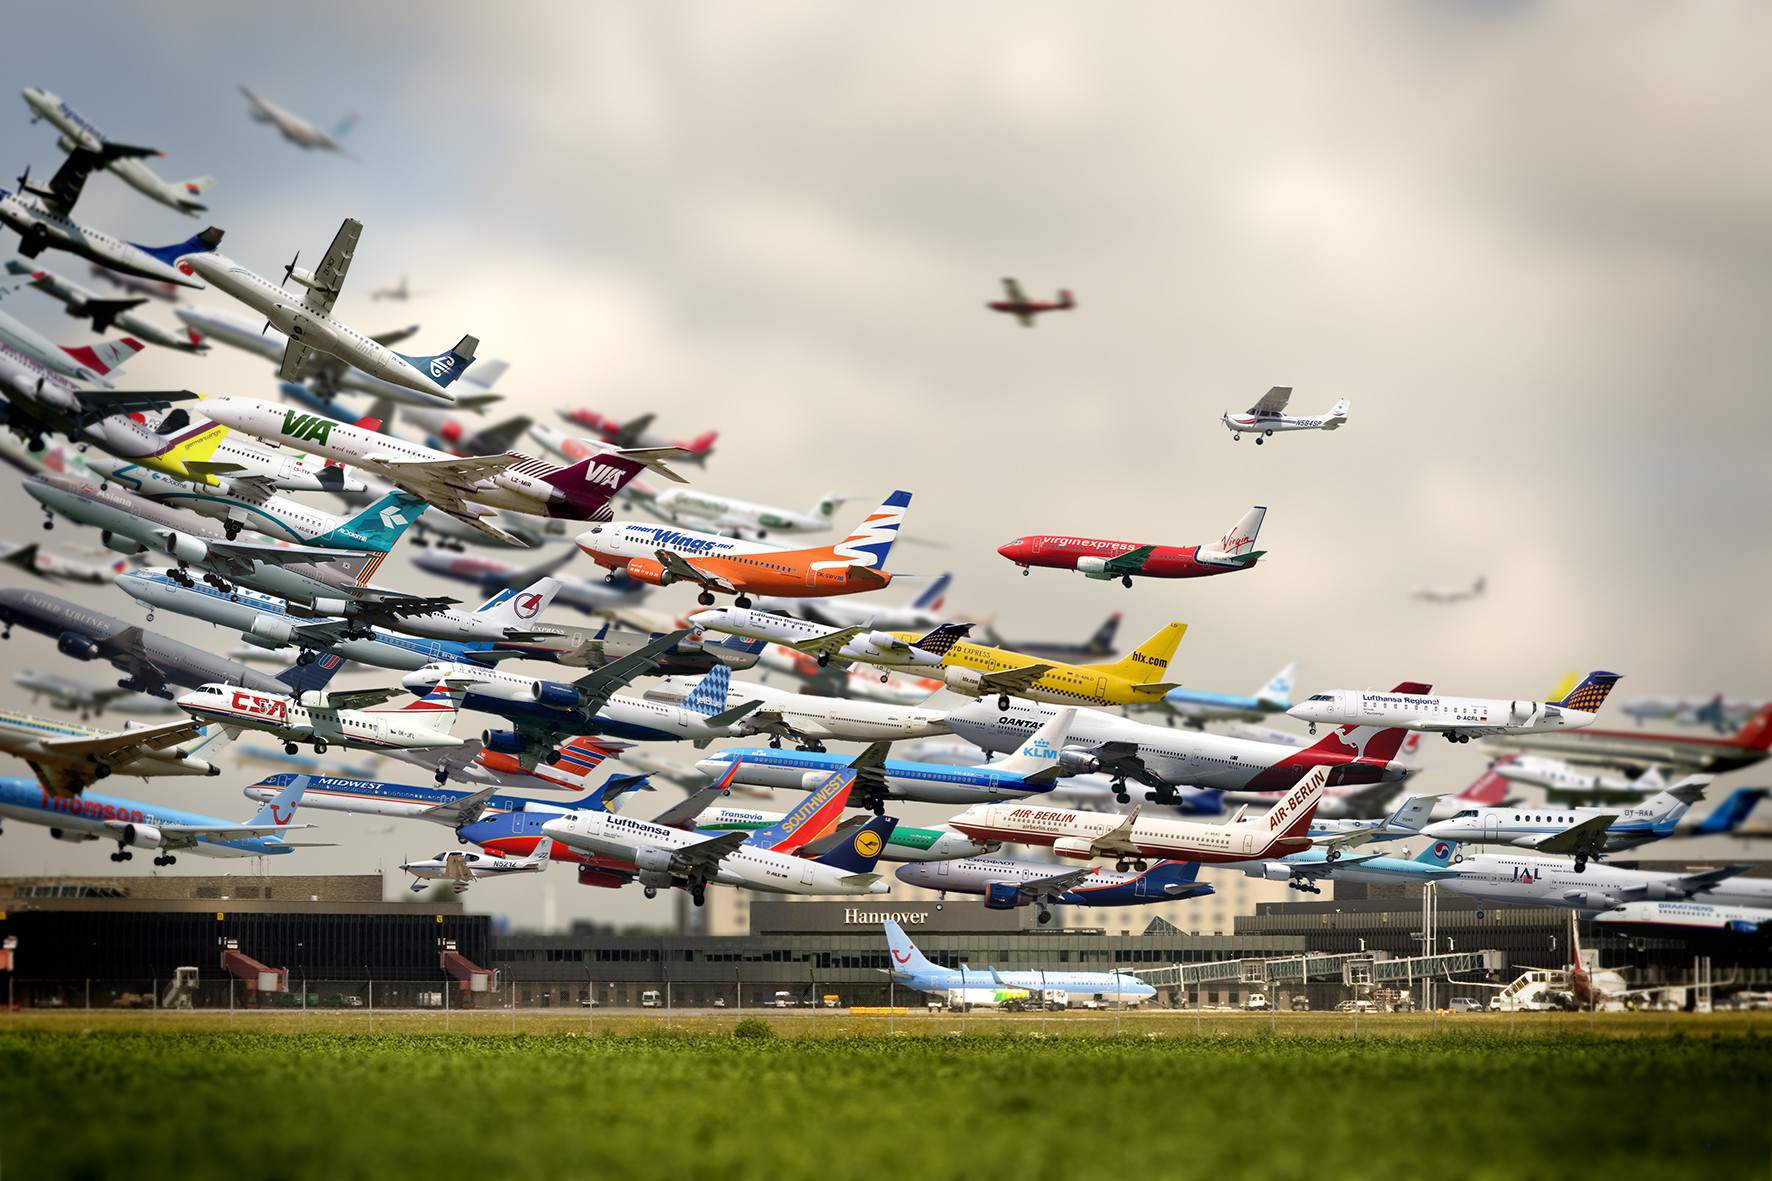 composite-airplanes-taking-off